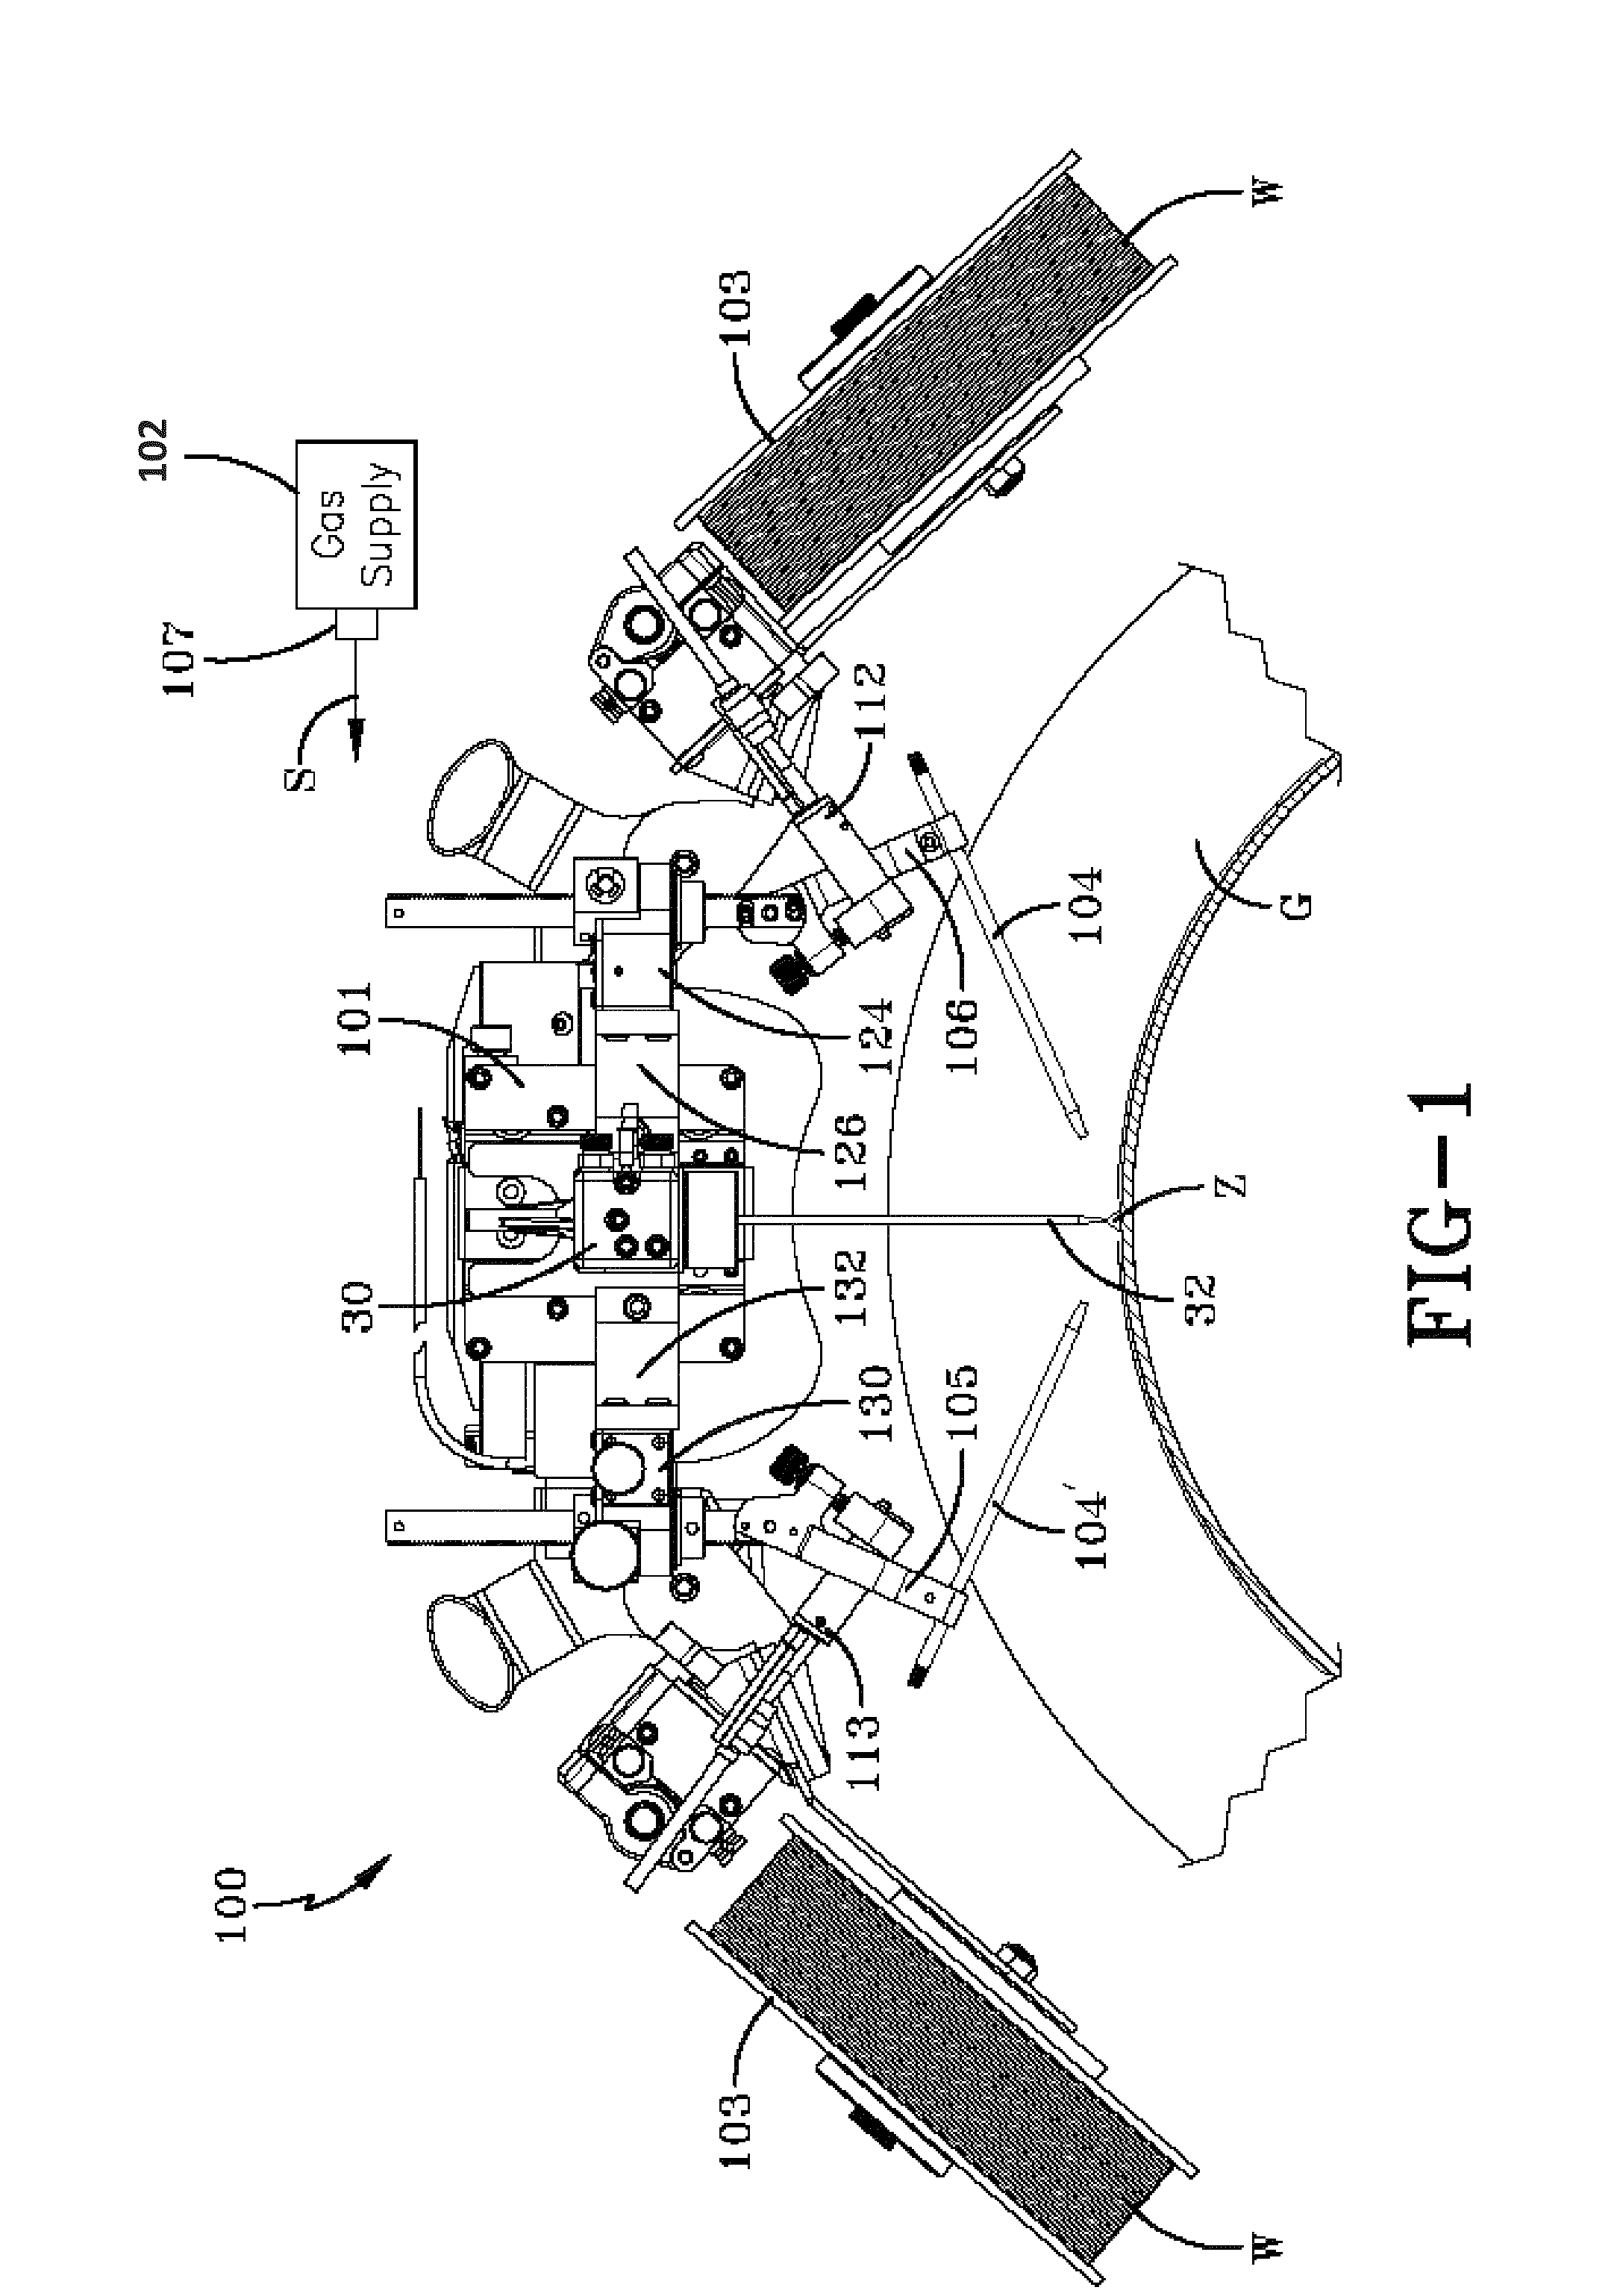 System and method for hot wire tig positioned heat control